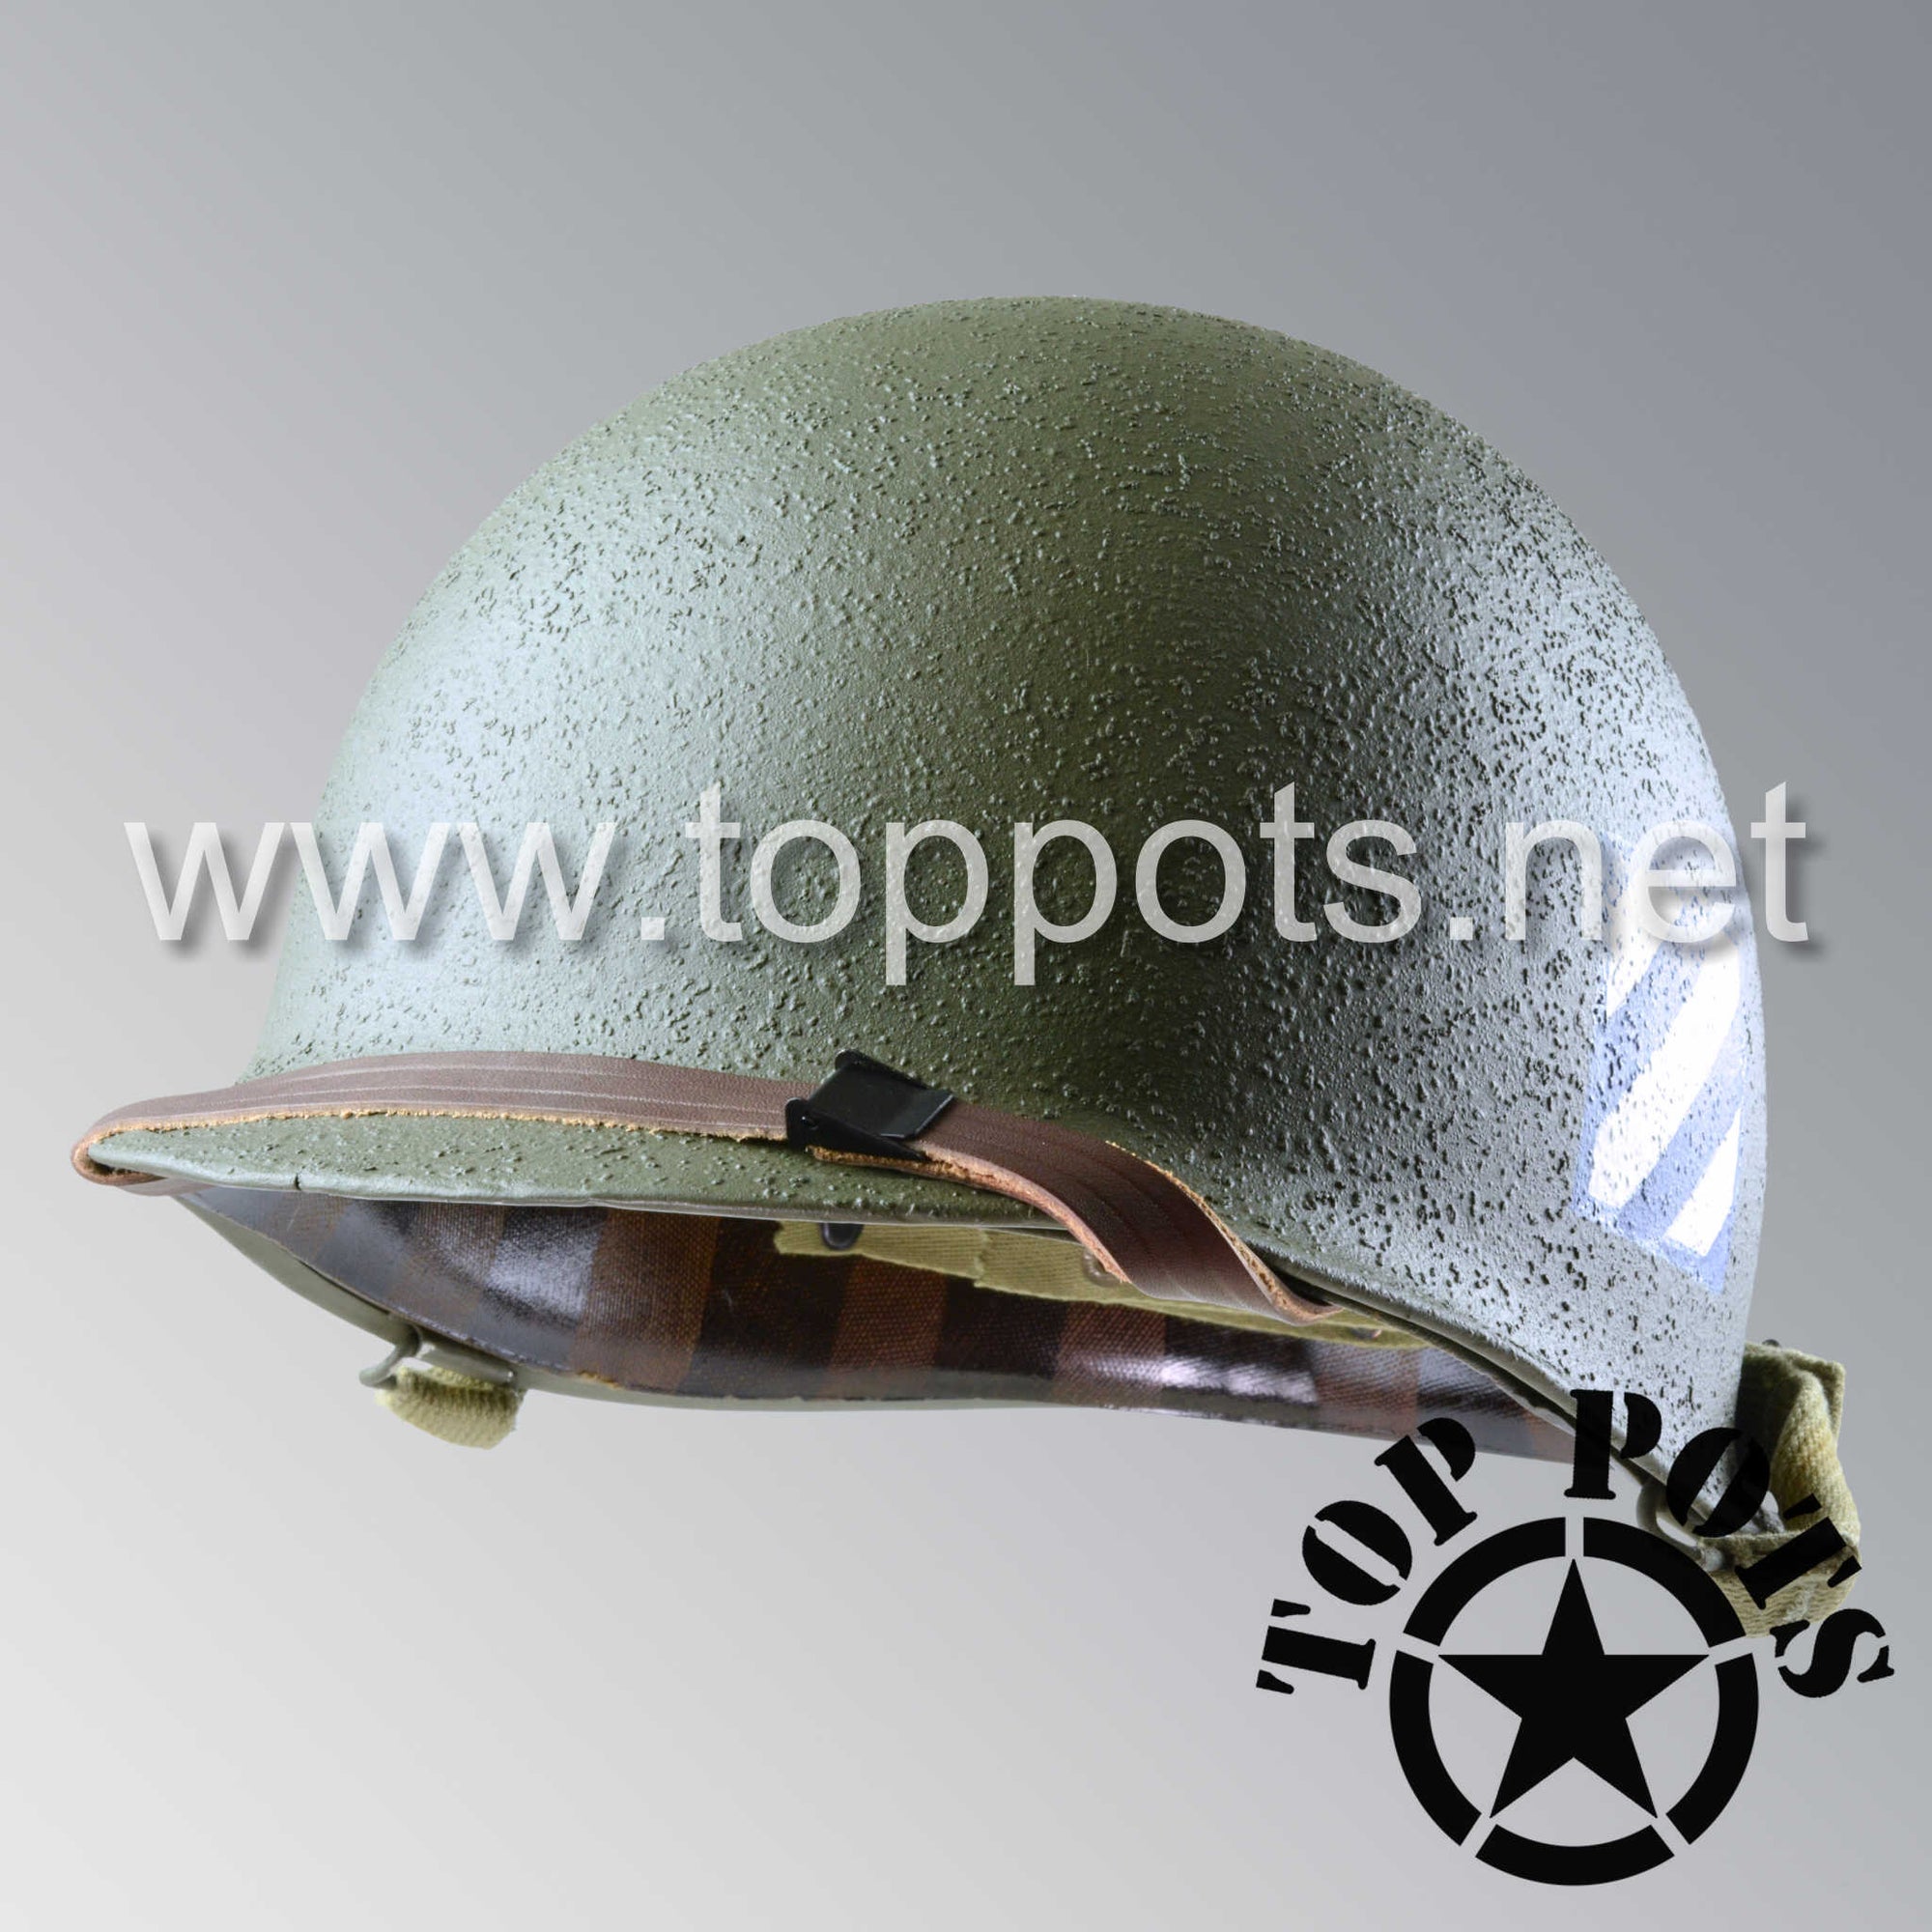 WWII US Army Restored Original M1 Infantry Helmet Swivel Bale Shell and Liner with 3rd Infantry Division Emblem - Schlueter Shell